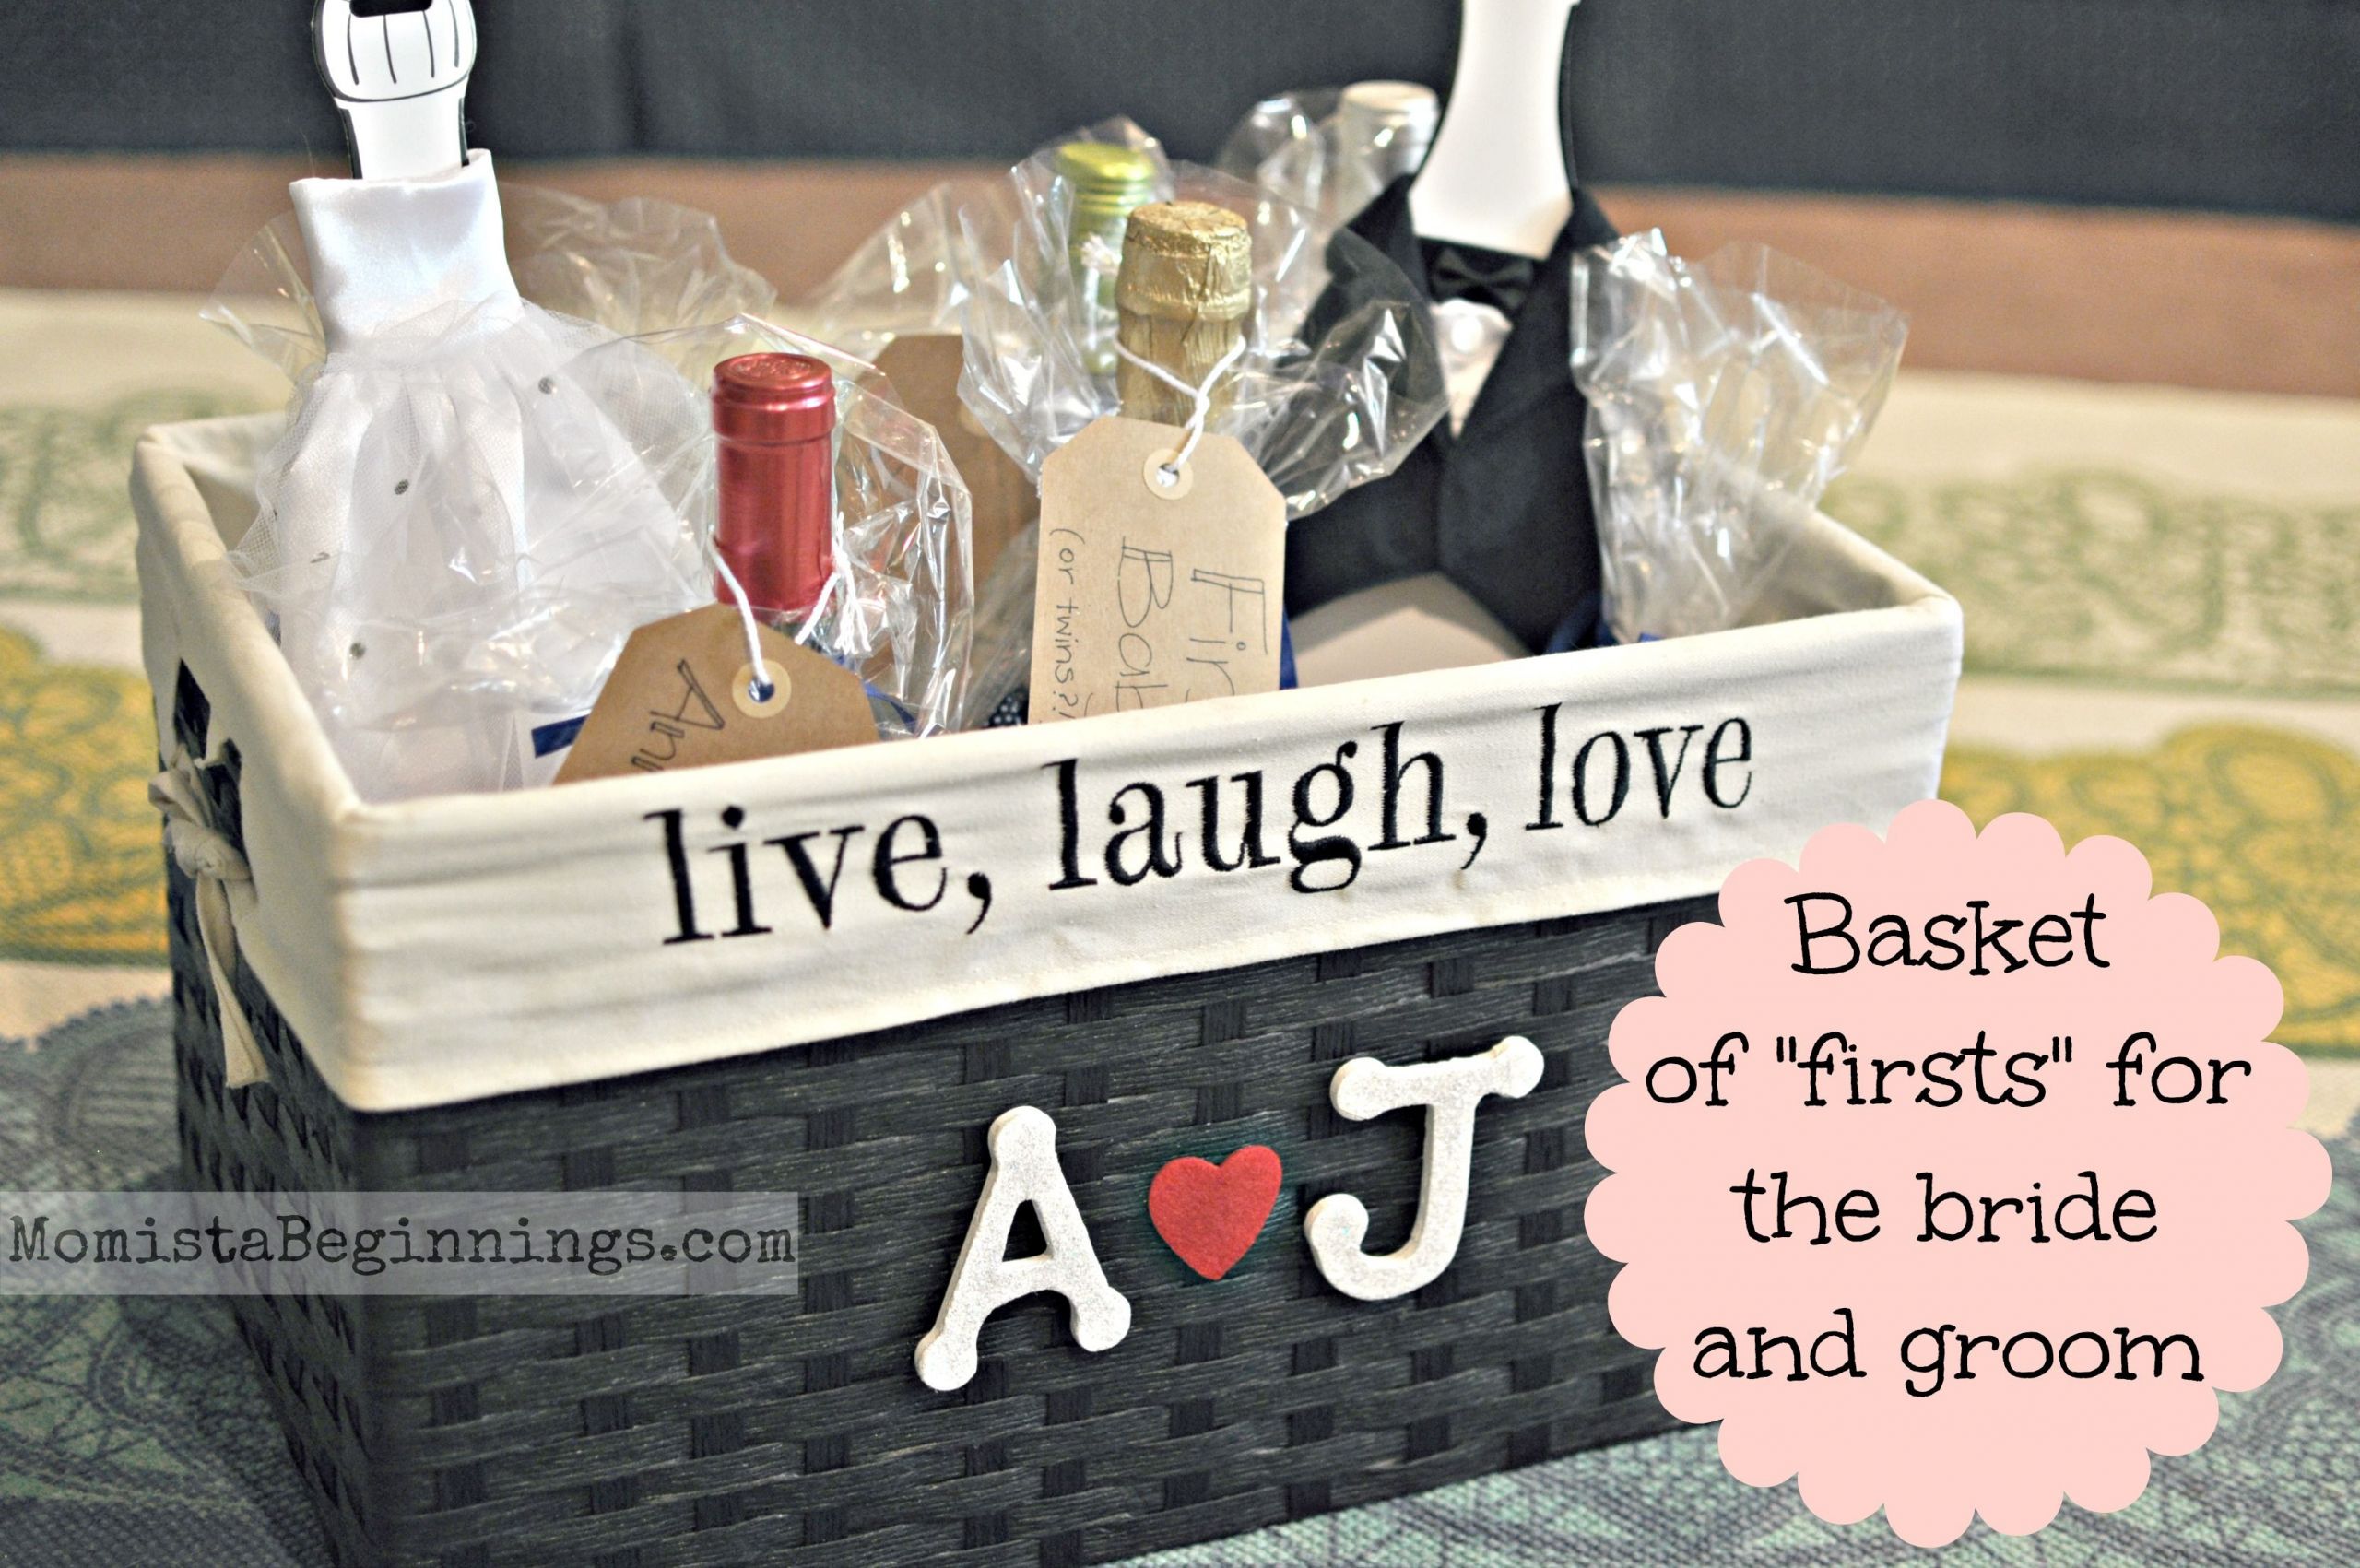 DIY Wedding Gift Baskets
 Basket of "firsts" bridal shower t This idea includes